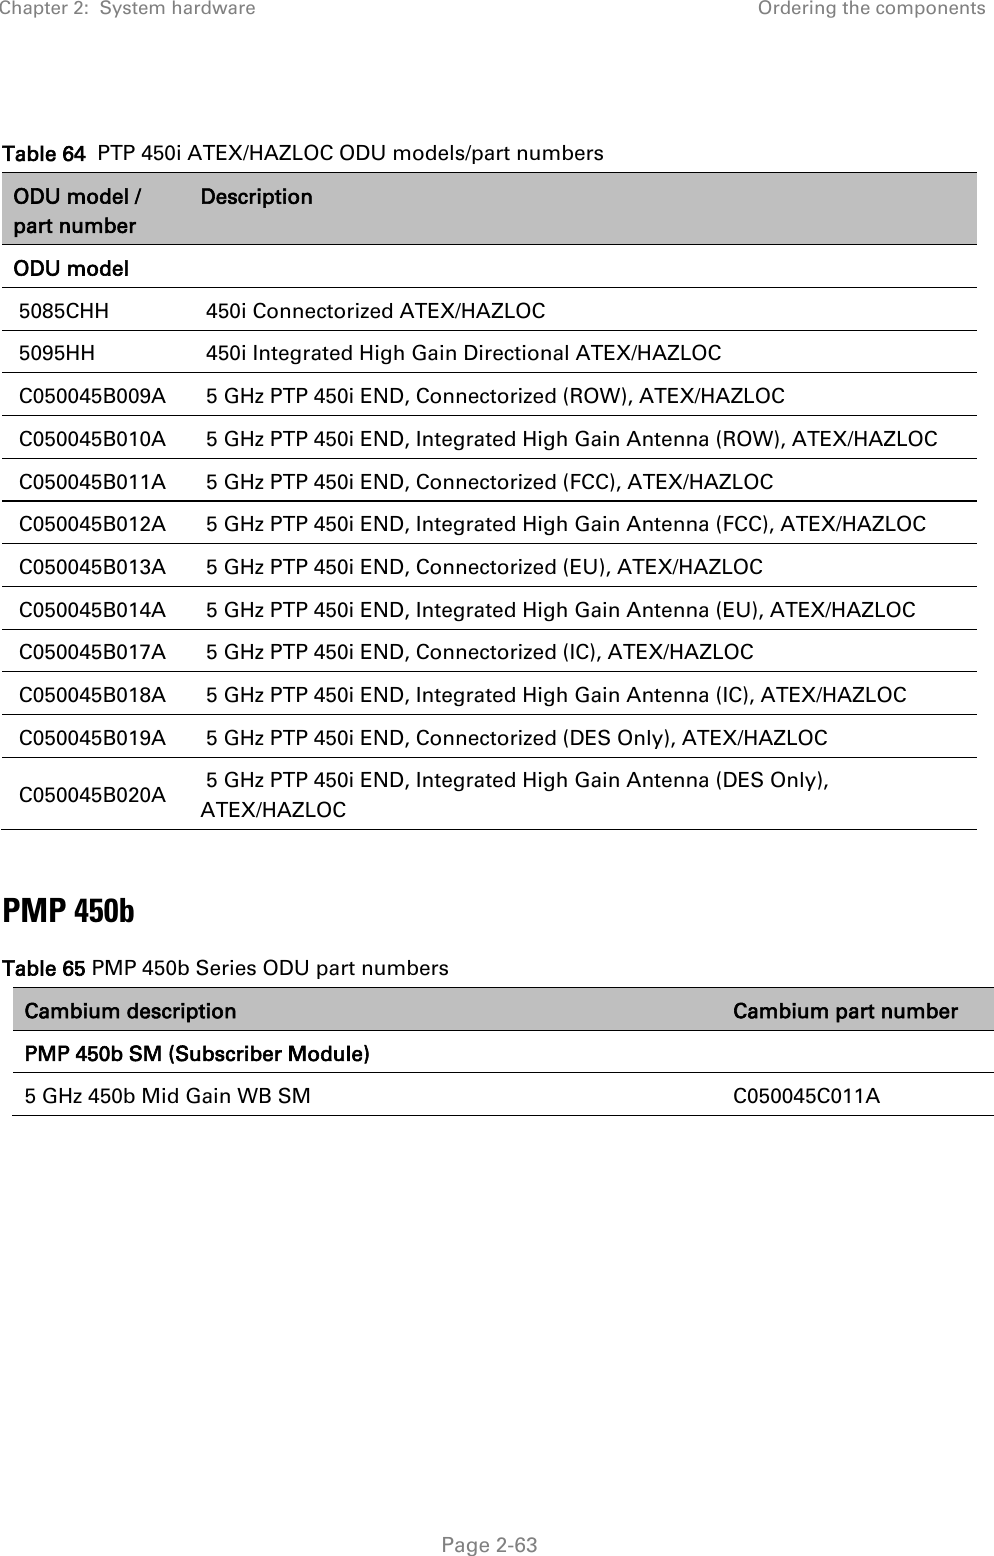 Chapter 2:  System hardware Ordering the components   Page 2-63  Table 64  PTP 450i ATEX/HAZLOC ODU models/part numbers ODU model / part number Description ODU model   5085CHH    450i Connectorized ATEX/HAZLOC   5095HH    450i Integrated High Gain Directional ATEX/HAZLOC   C050045B009A    5 GHz PTP 450i END, Connectorized (ROW), ATEX/HAZLOC   C050045B010A    5 GHz PTP 450i END, Integrated High Gain Antenna (ROW), ATEX/HAZLOC   C050045B011A    5 GHz PTP 450i END, Connectorized (FCC), ATEX/HAZLOC   C050045B012A    5 GHz PTP 450i END, Integrated High Gain Antenna (FCC), ATEX/HAZLOC   C050045B013A    5 GHz PTP 450i END, Connectorized (EU), ATEX/HAZLOC   C050045B014A    5 GHz PTP 450i END, Integrated High Gain Antenna (EU), ATEX/HAZLOC   C050045B017A    5 GHz PTP 450i END, Connectorized (IC), ATEX/HAZLOC   C050045B018A    5 GHz PTP 450i END, Integrated High Gain Antenna (IC), ATEX/HAZLOC   C050045B019A    5 GHz PTP 450i END, Connectorized (DES Only), ATEX/HAZLOC   C050045B020A   5 GHz PTP 450i END, Integrated High Gain Antenna (DES Only), ATEX/HAZLOC   PMP 450b Table 65 PMP 450b Series ODU part numbers Cambium description Cambium part number PMP 450b SM (Subscriber Module)   5 GHz 450b Mid Gain WB SM C050045C011A    